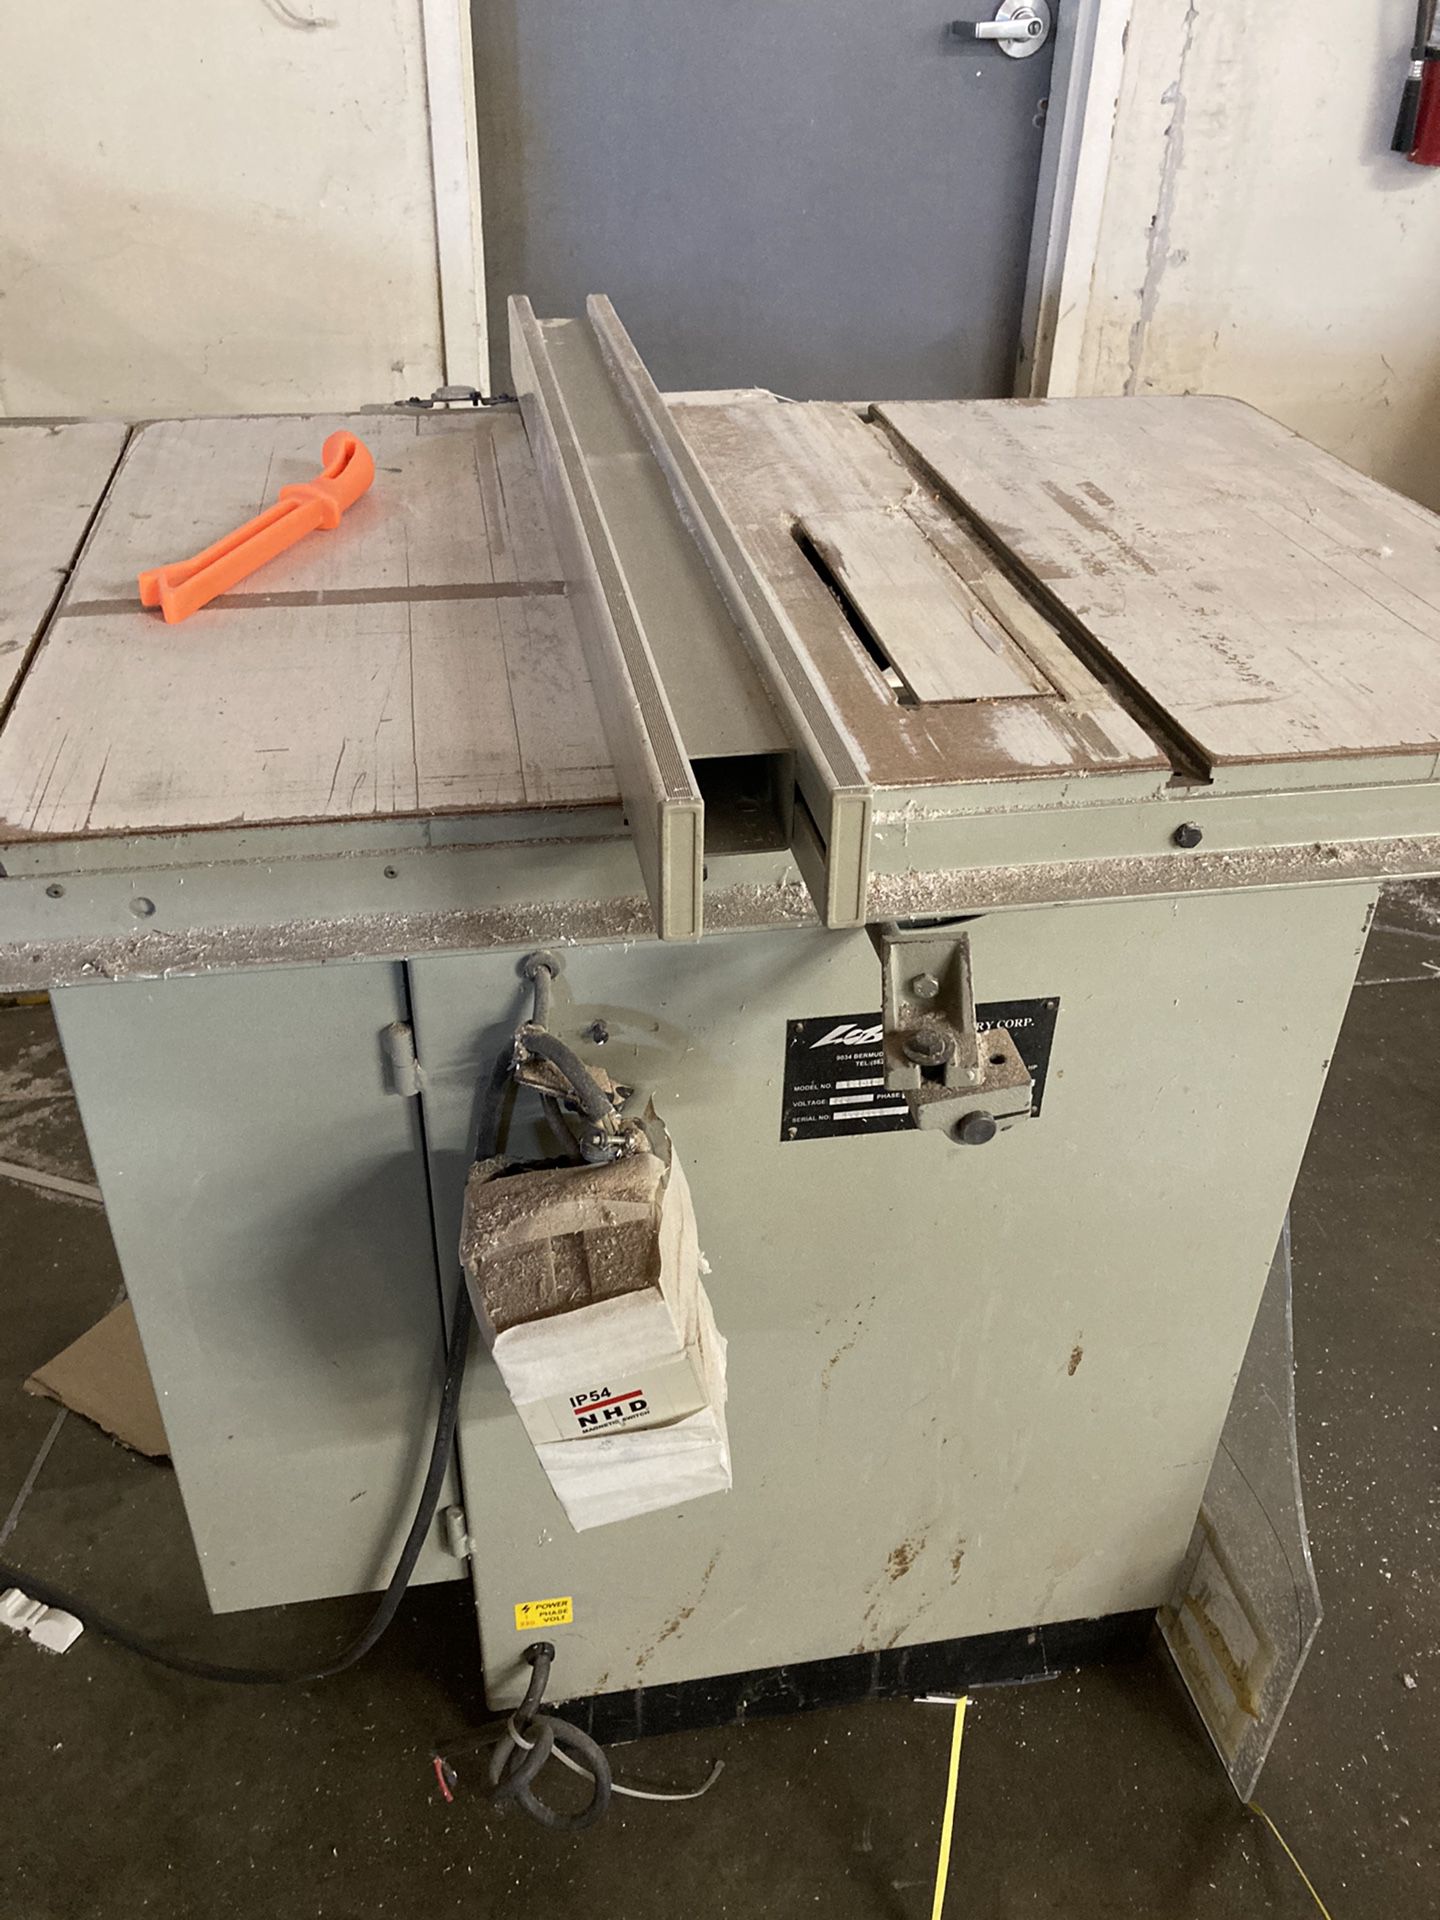 Robo Table Saw - Missing Guard but Working